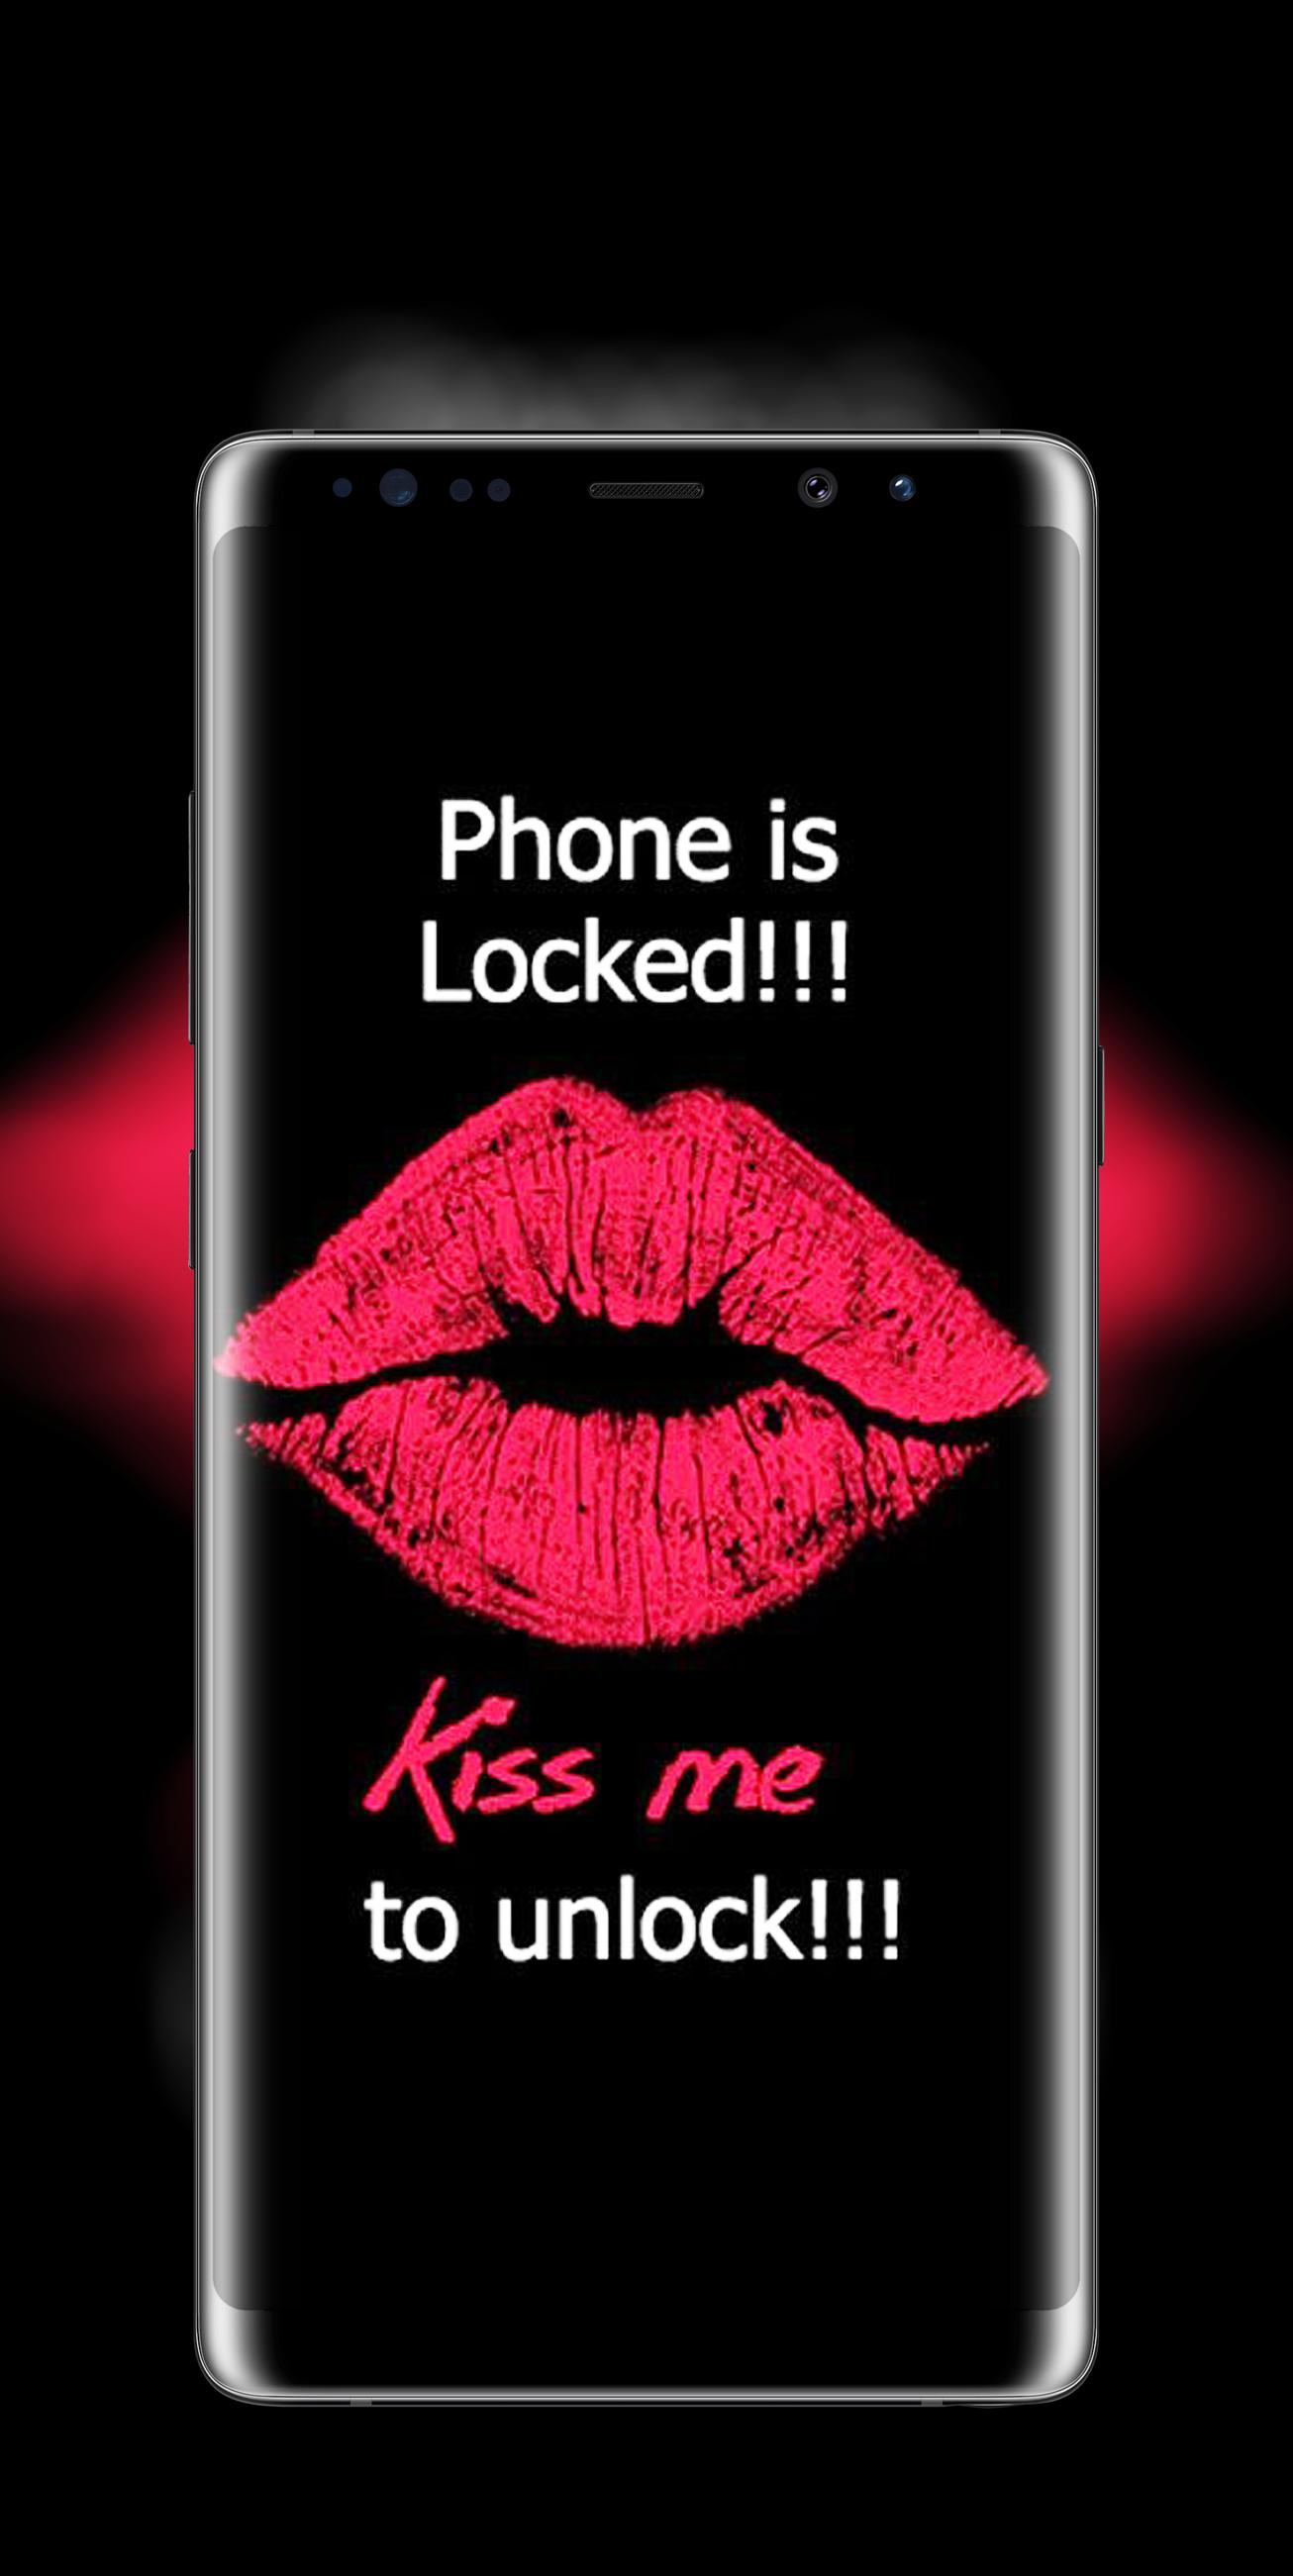 Dont Touch My Phone Wallpaper For Android Apk Download